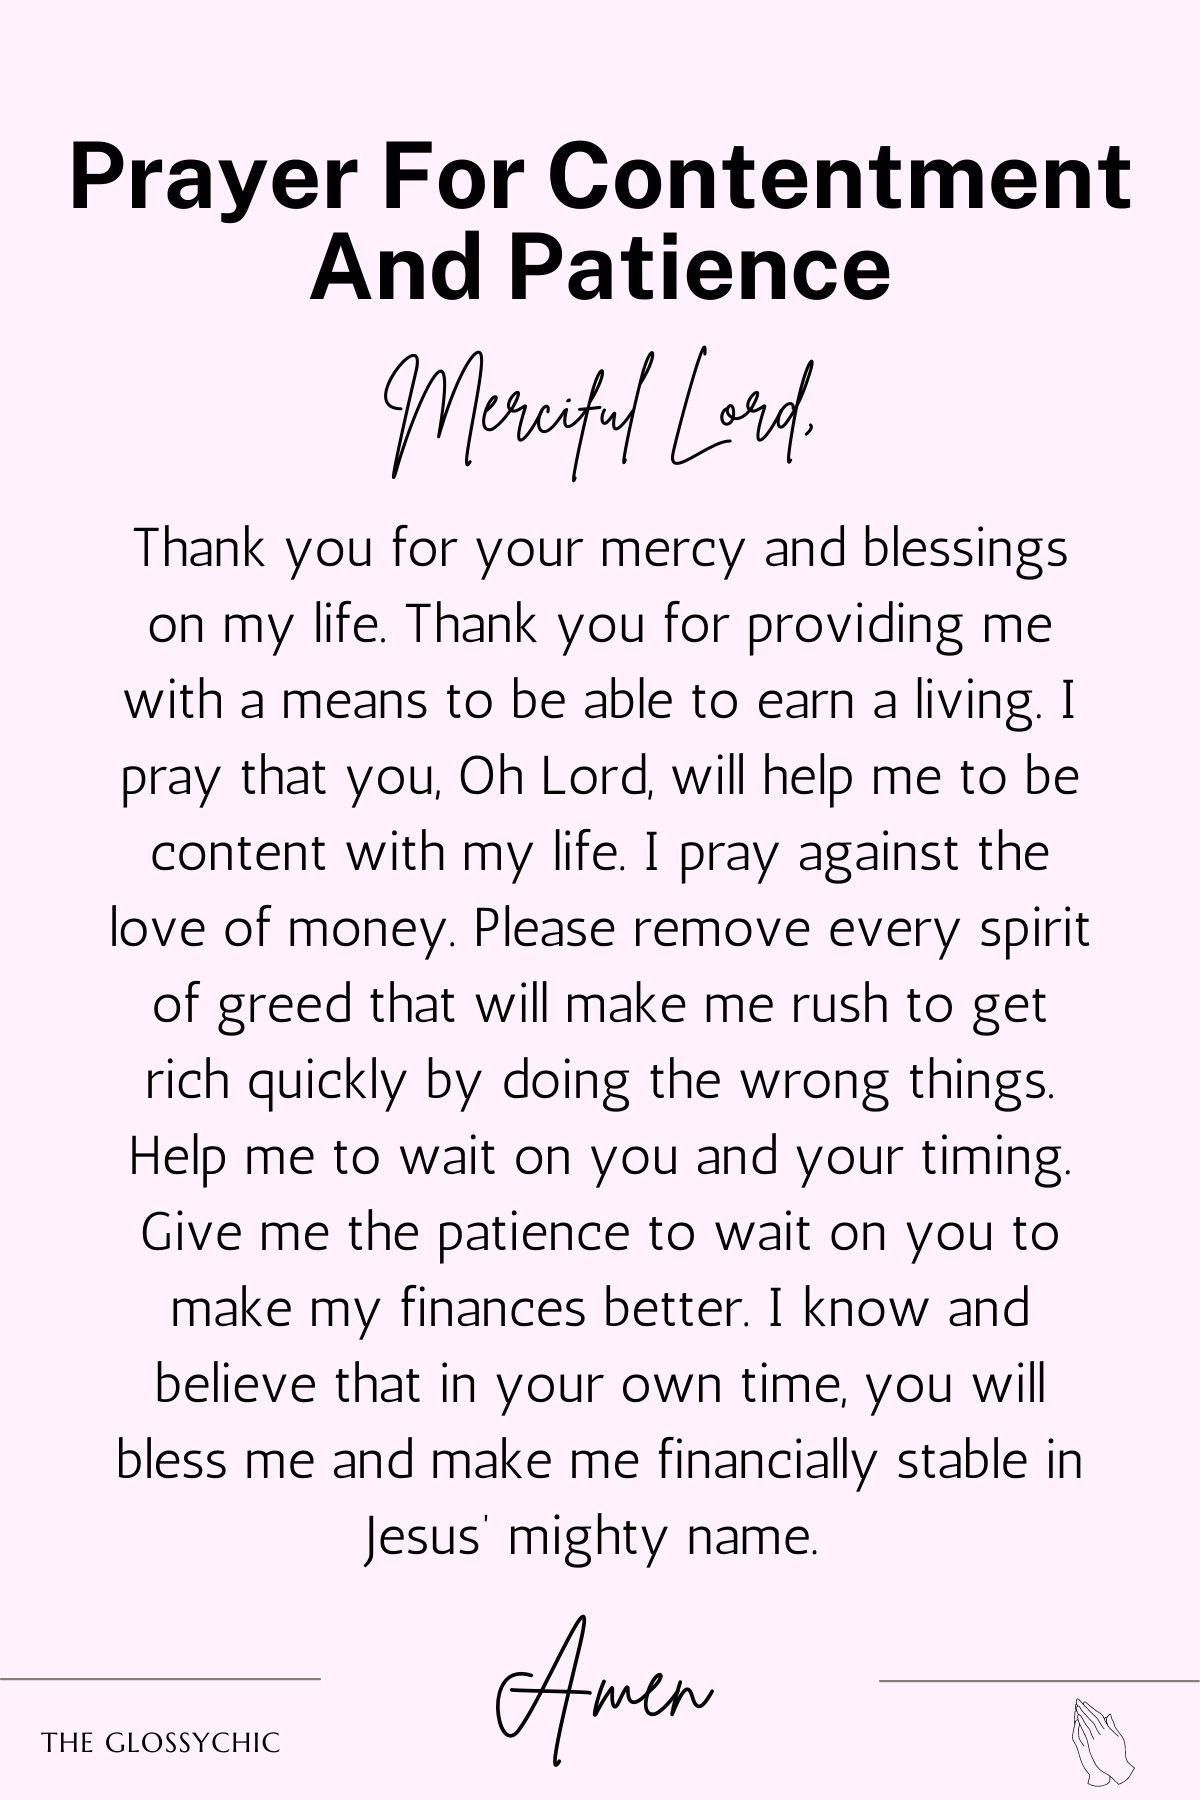 Prayer for contentment and patience